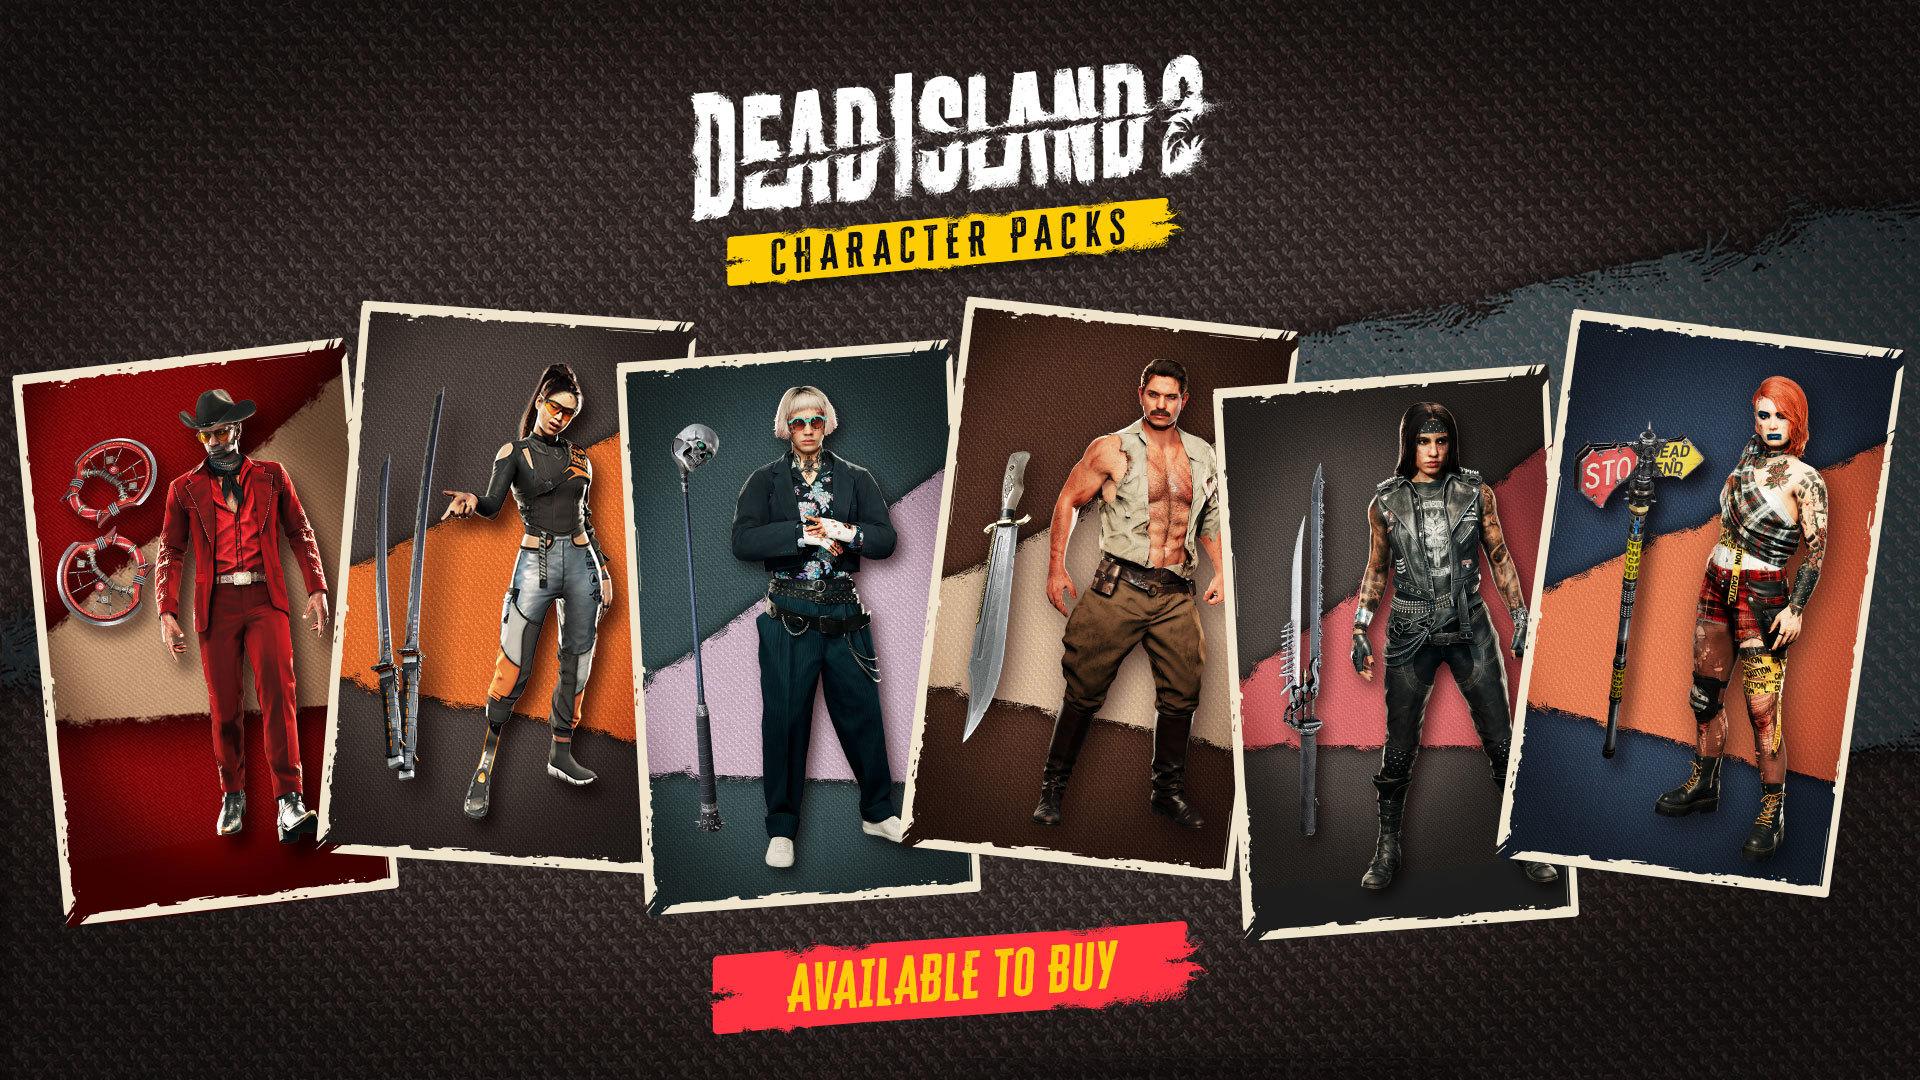 Dead Island 2: HELL-A Edition, Expansion Pass DLC Slip, Collectors  Official